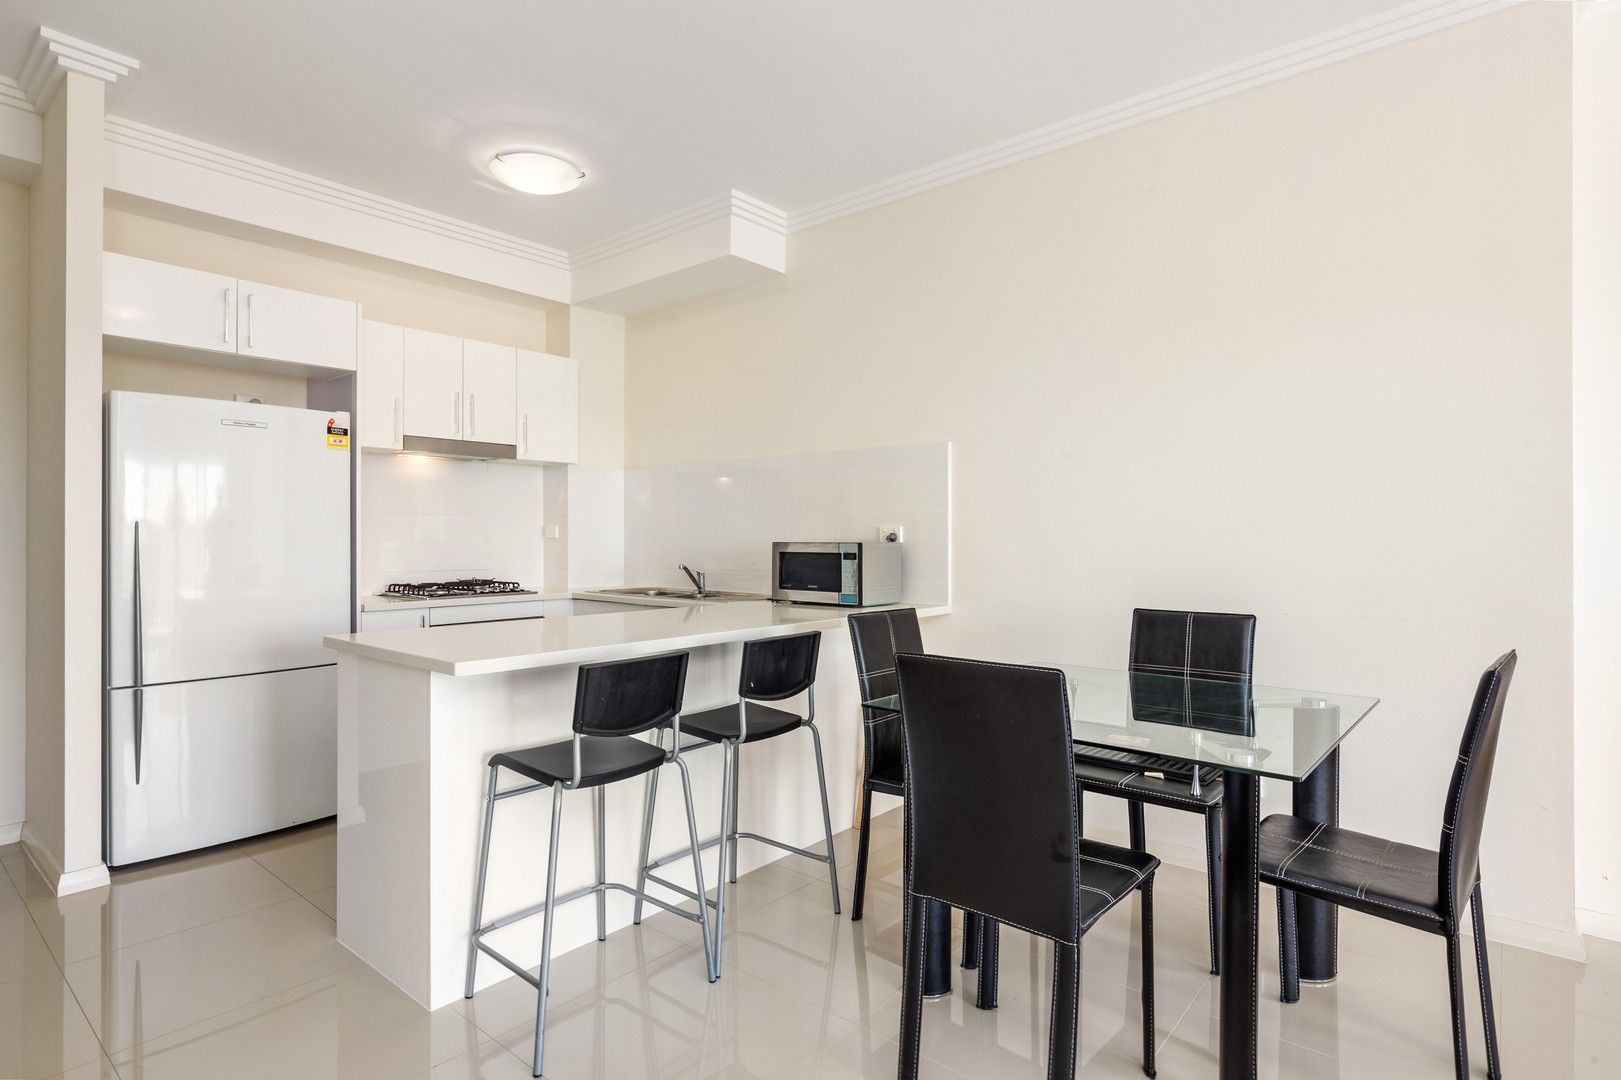 2 bedrooms Apartment / Unit / Flat in 77/24 Lachlan Street LIVERPOOL NSW, 2170